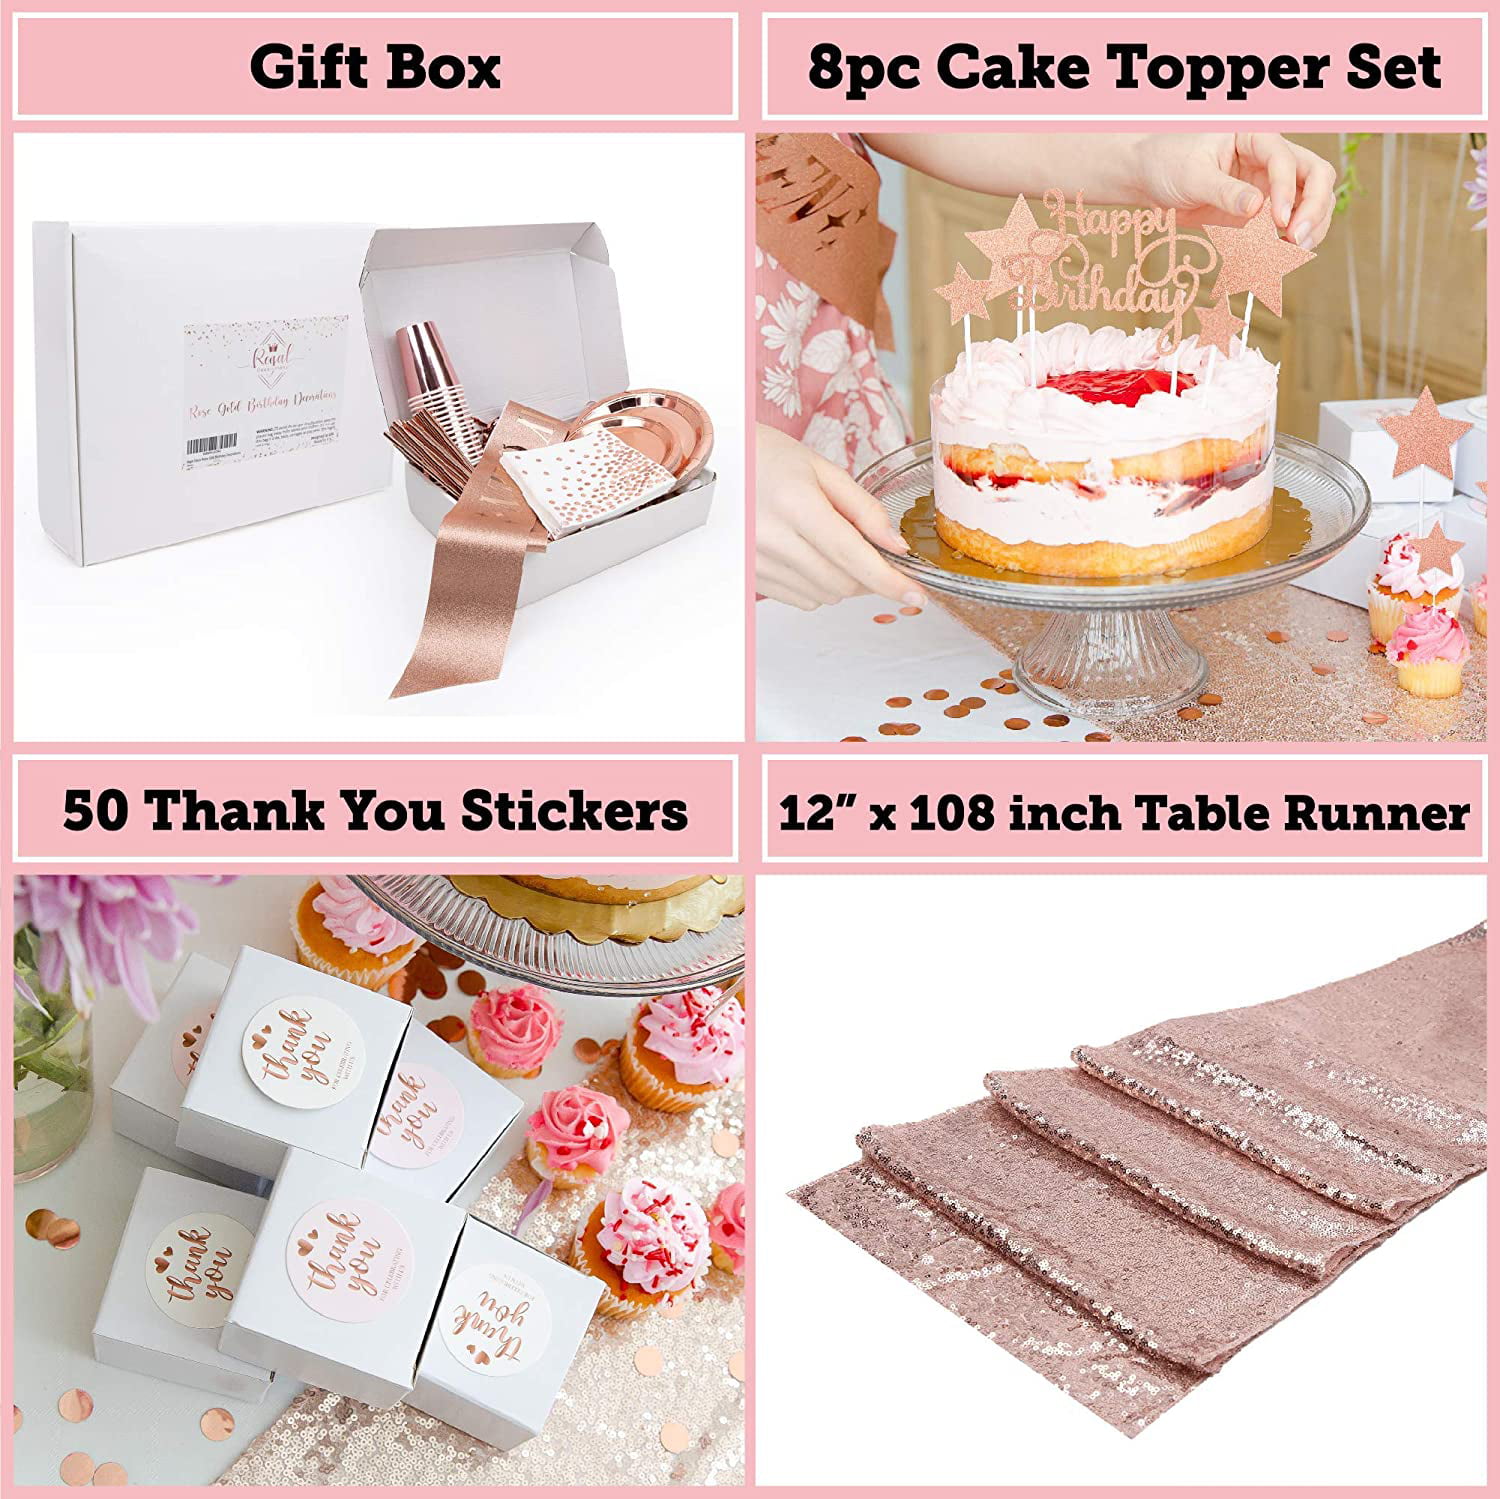 Sash Tiara Cake Topper Plates Cups Napkins Straws for 25 Guest & More Happy Birthday Banners Teens 225 PC Rose Gold Birthday Party Decorations Kit for Girls Women Curtains Table Runner Balloons